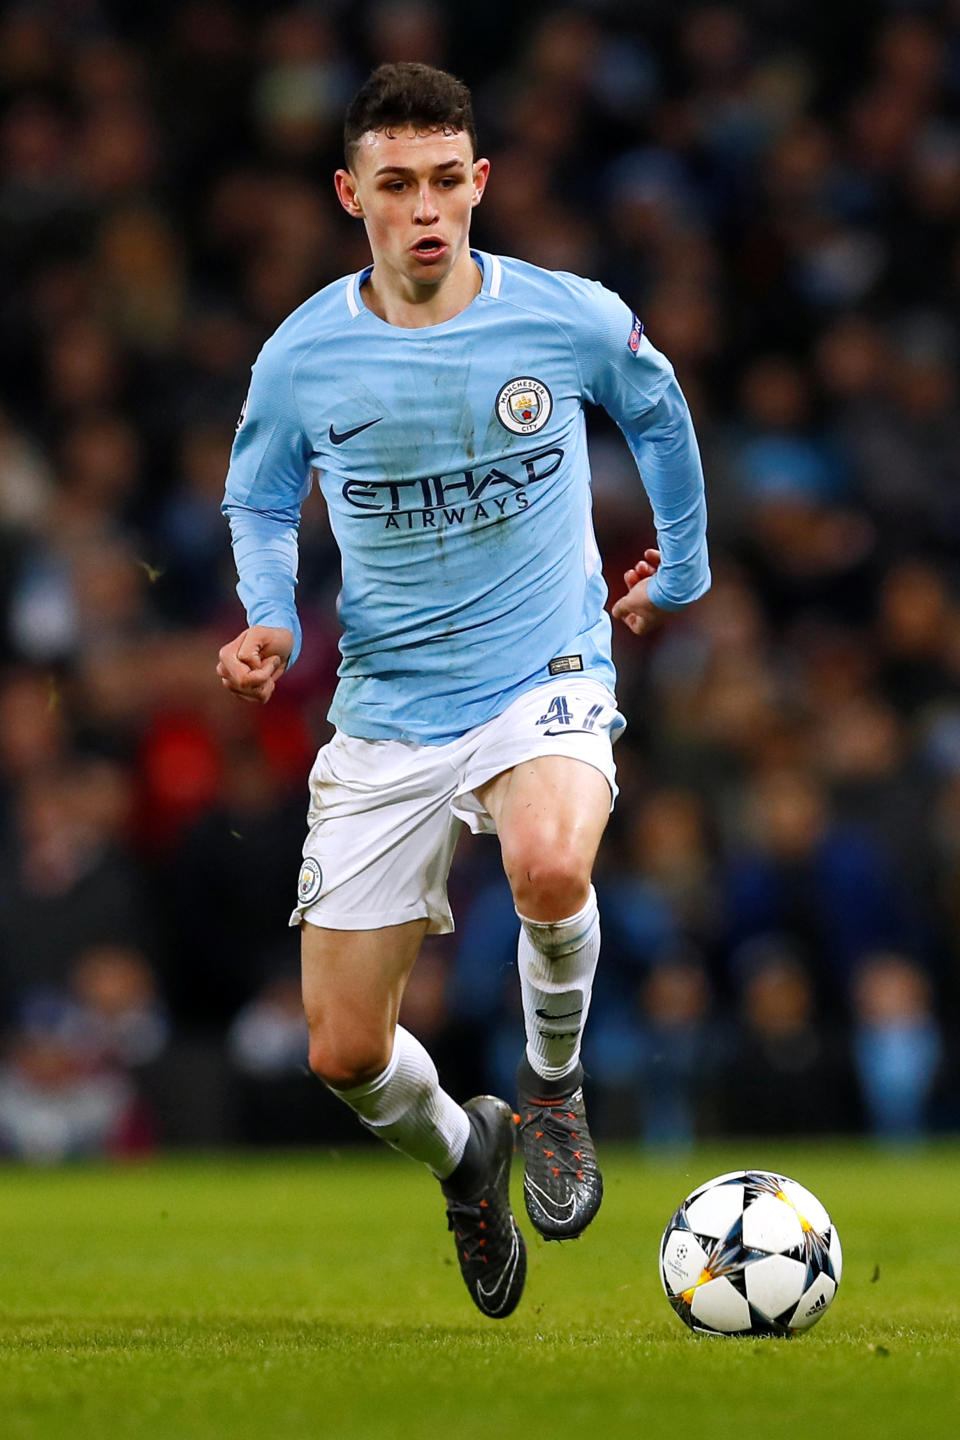 Soccer Football – Champions League Round of 16 Second Leg – Manchester City vs FC Basel – Etihad Stadium, Manchester, Britain – March 7, 2018 Manchester City’s Phil Foden in action Action Images via Reuters/Jason Cairnduff